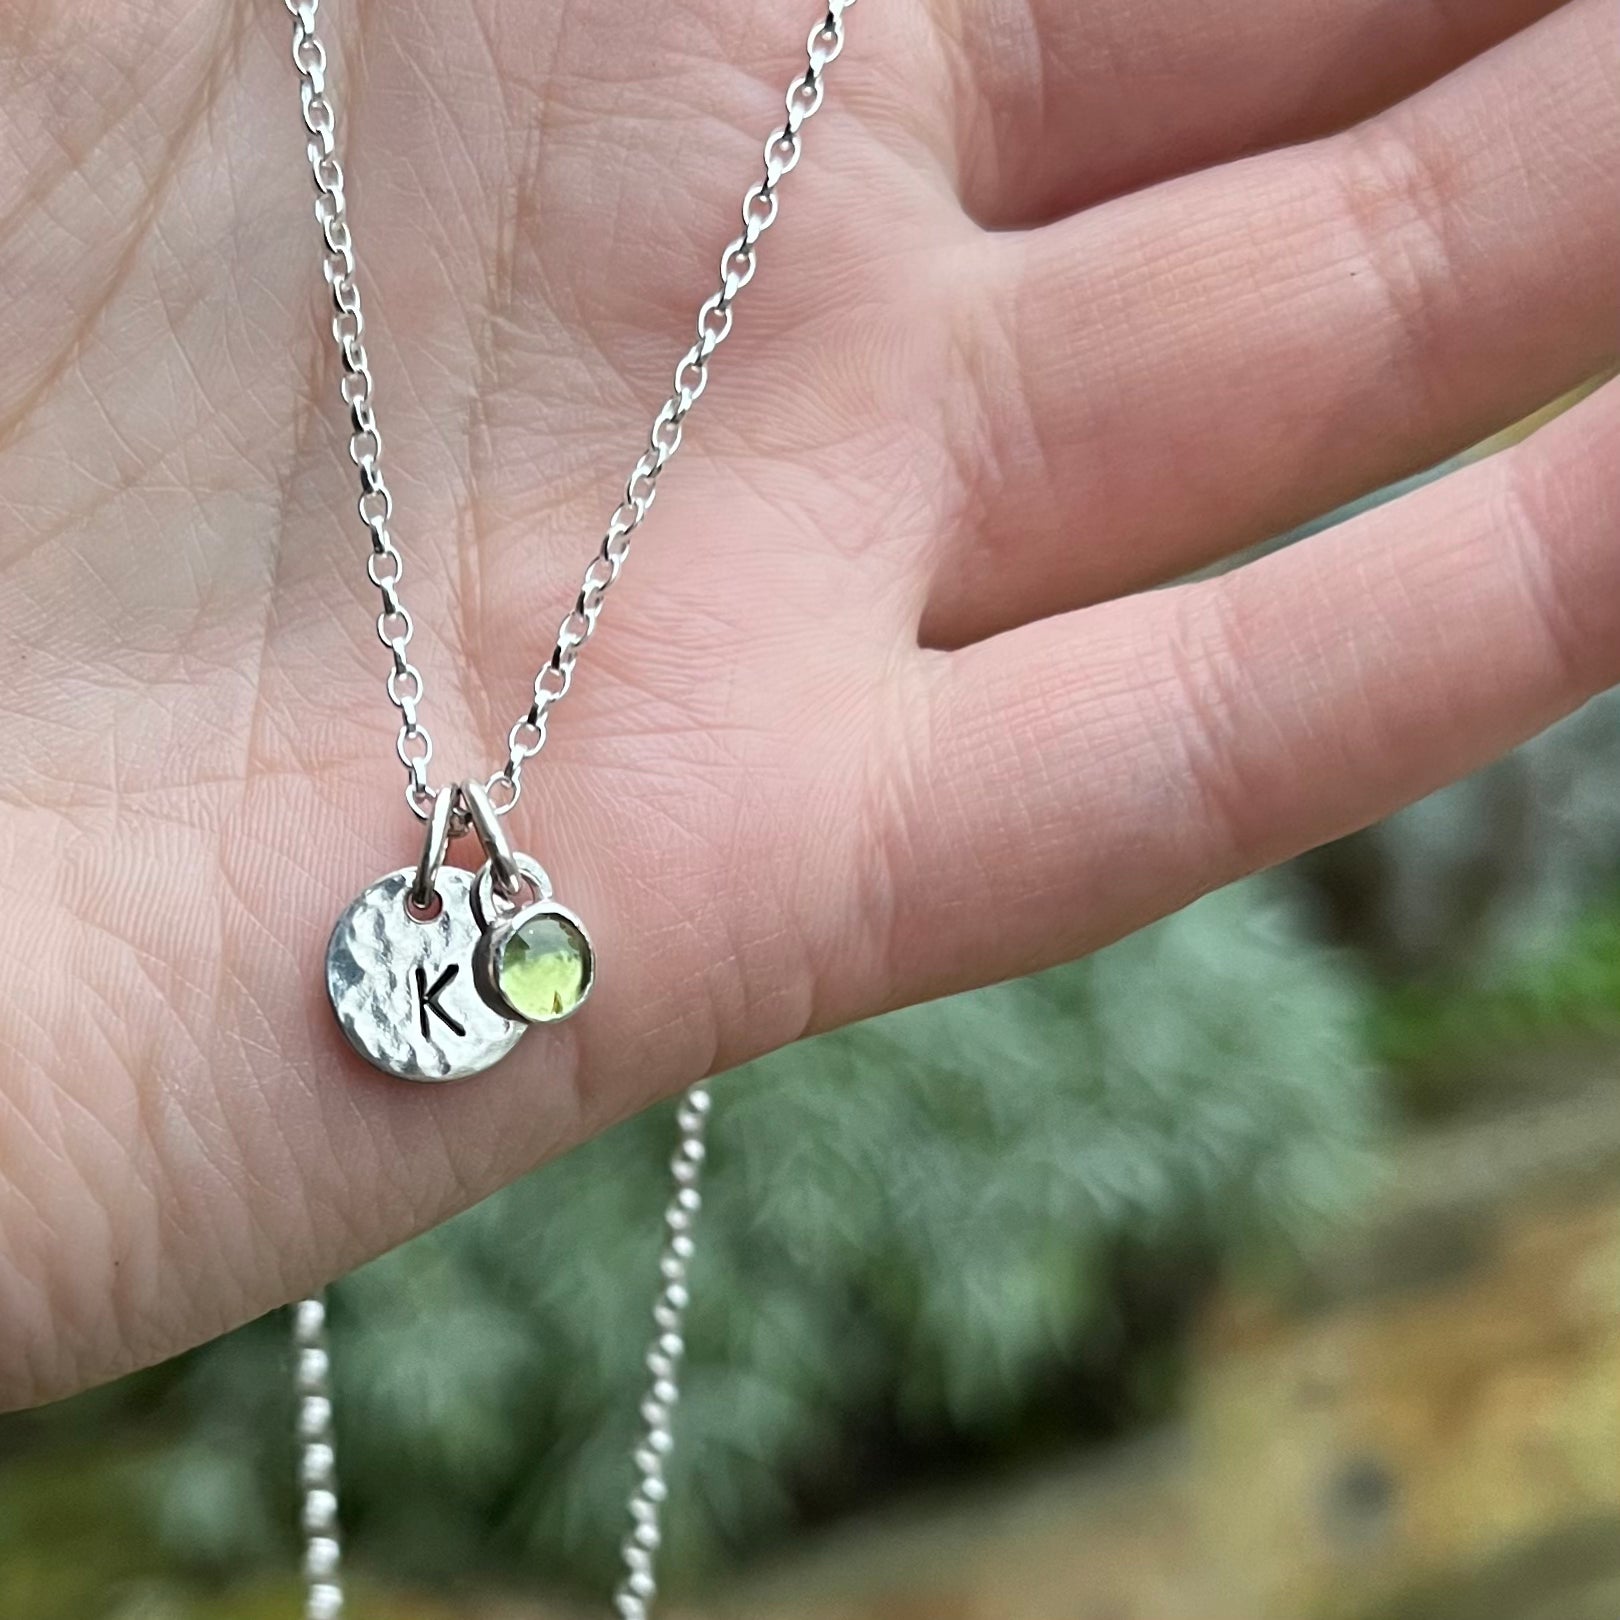 A necklace with a sterling silver disc charm stamped with a K paired with a 5mm peridot stone charm.